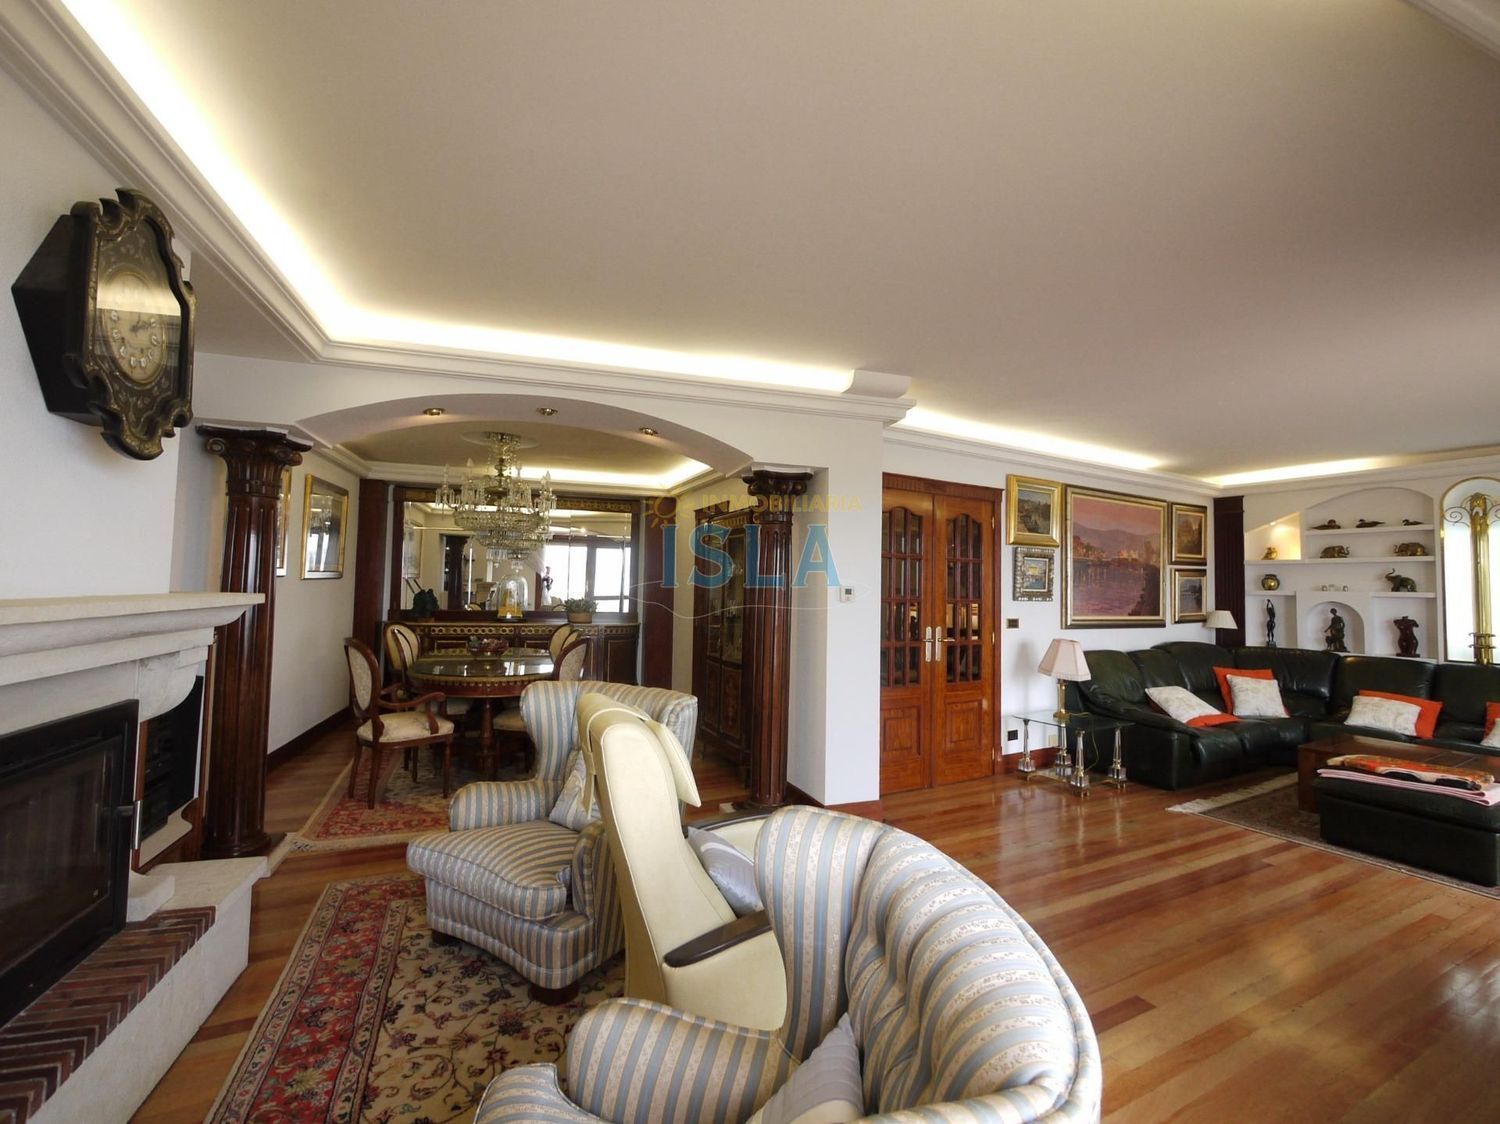 Townhouse for sale on the seafront on Paseo del Sable, in Arnuero